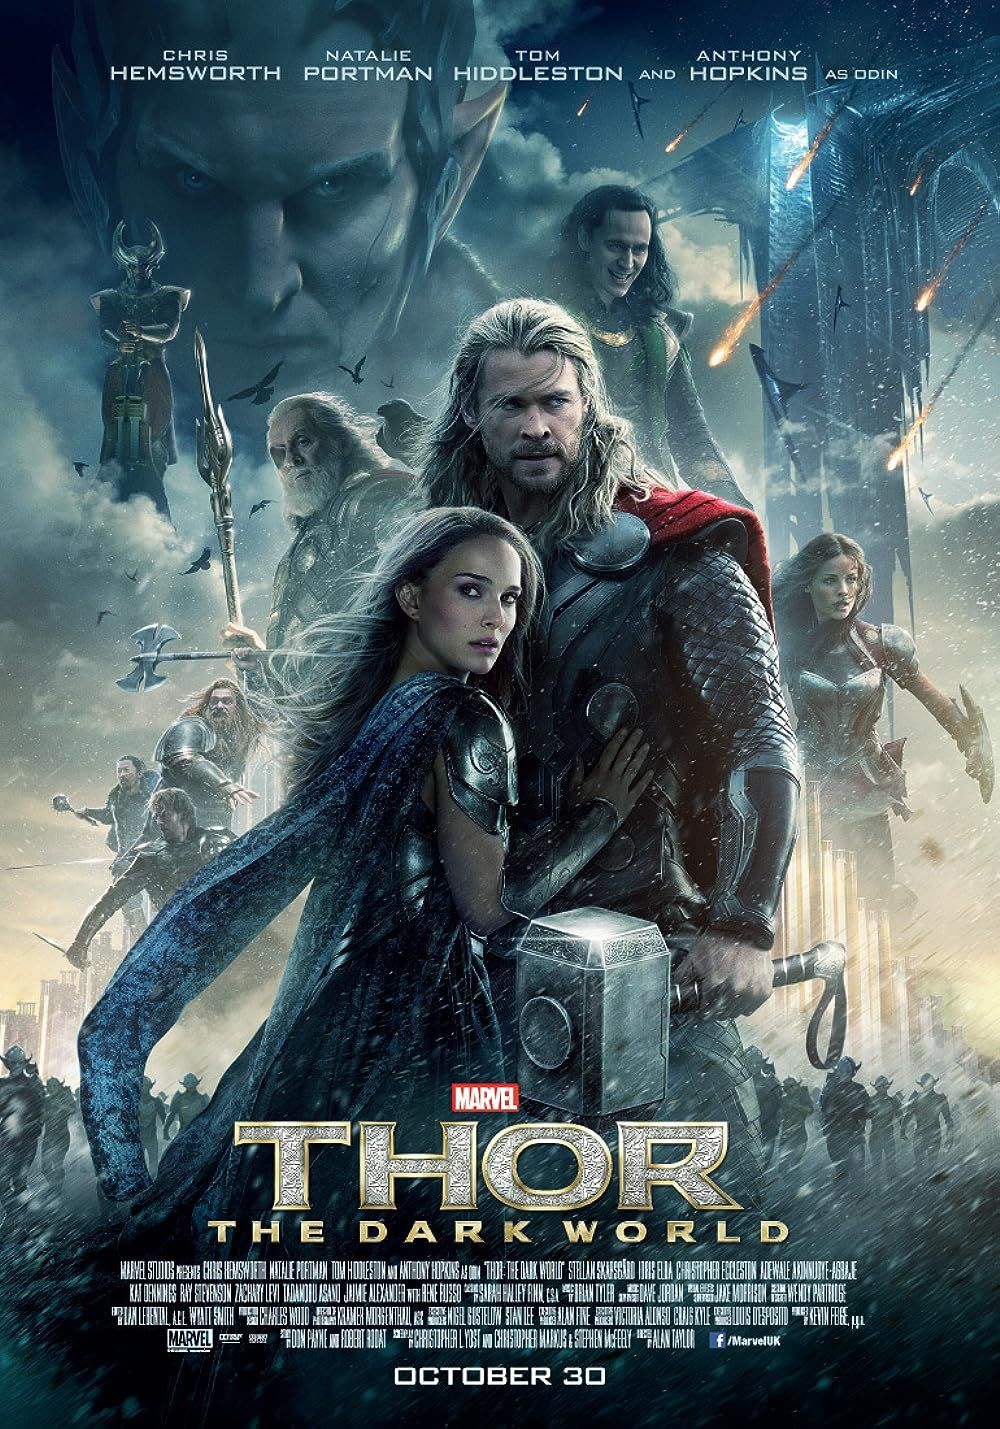 The Cast on the Thor The Dark World Poster